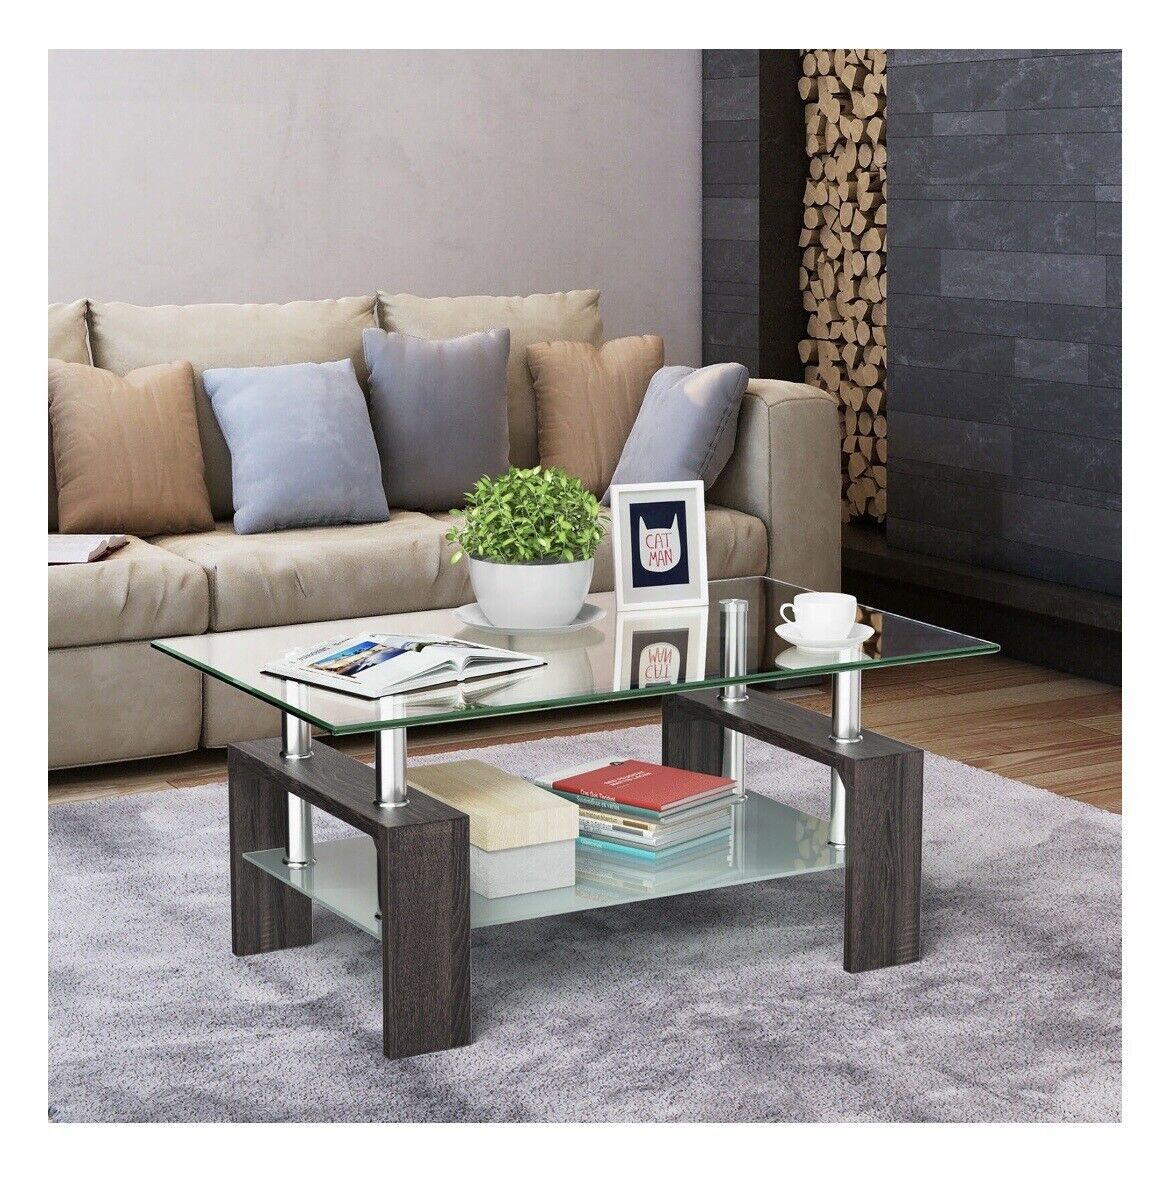 Wood Tempered Glass Top Coffee Table Rectangular W/ Shelf Home Furniture |  Ebay Throughout Wood Tempered Glass Top Coffee Tables (View 13 of 15)